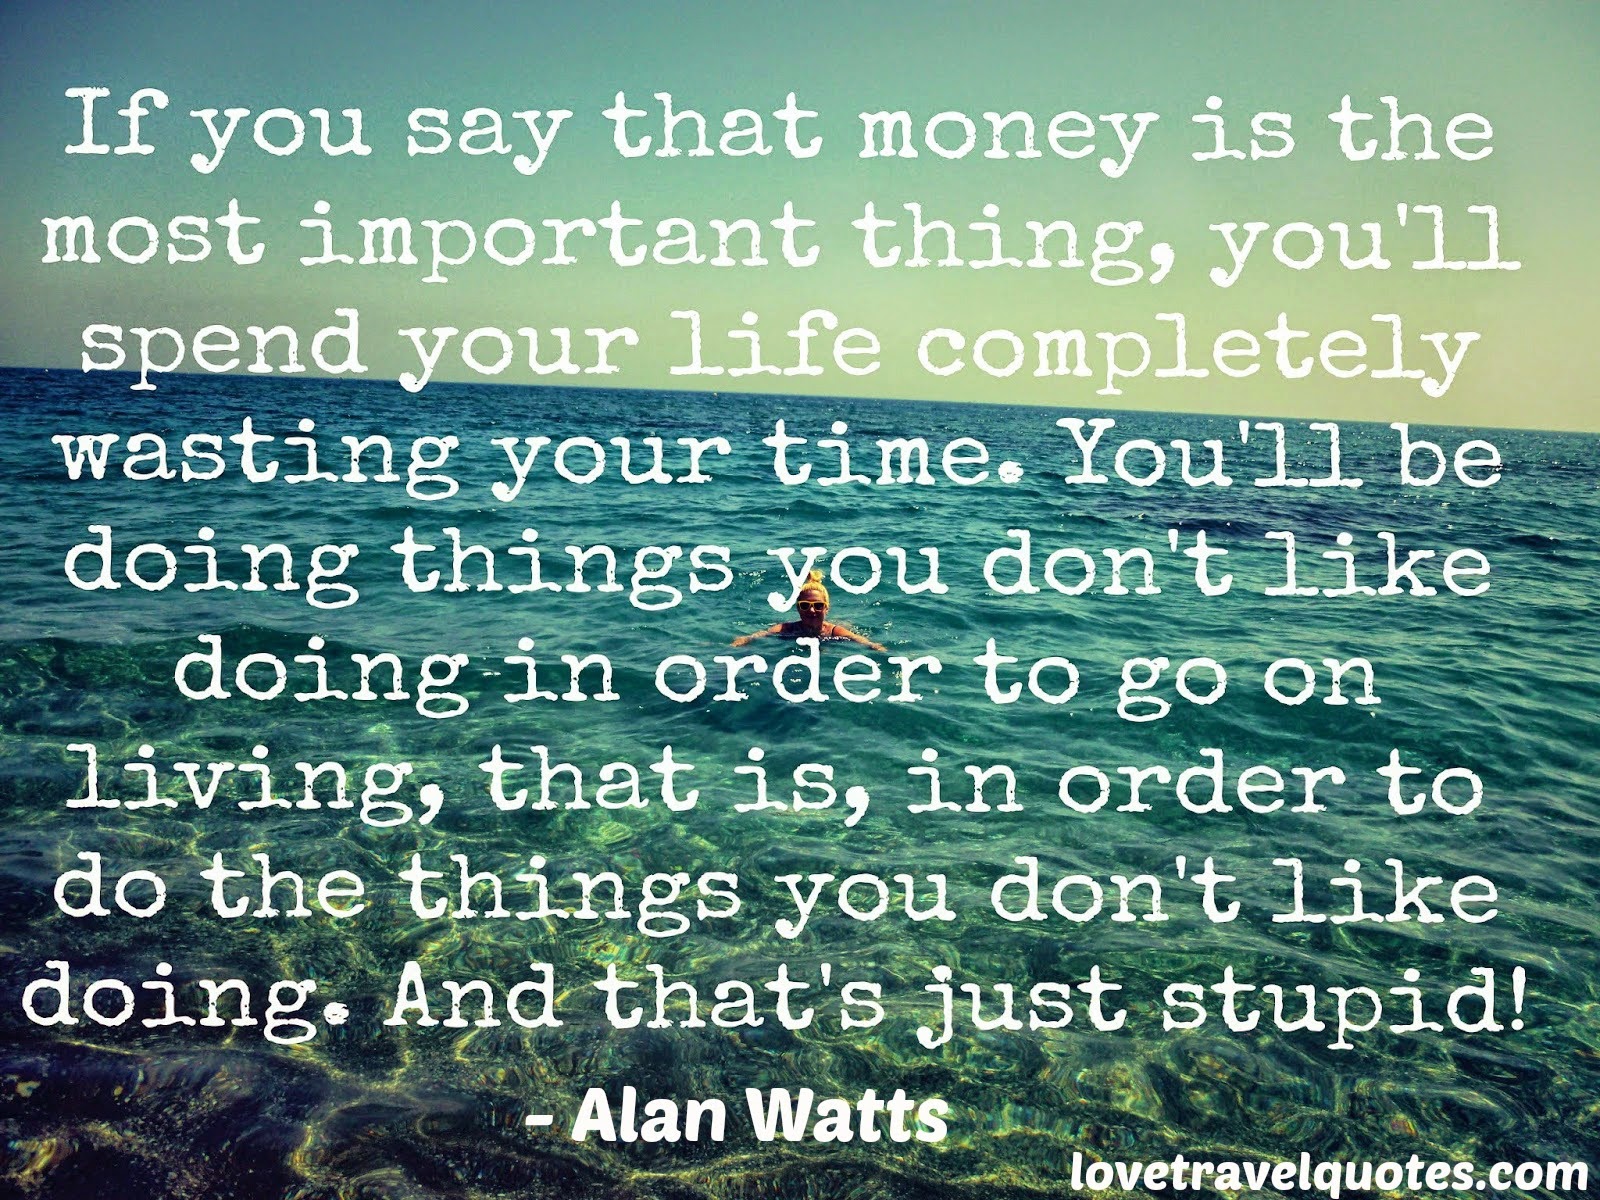 If you say money is the most important thing you'll spend your life completely wasting your time